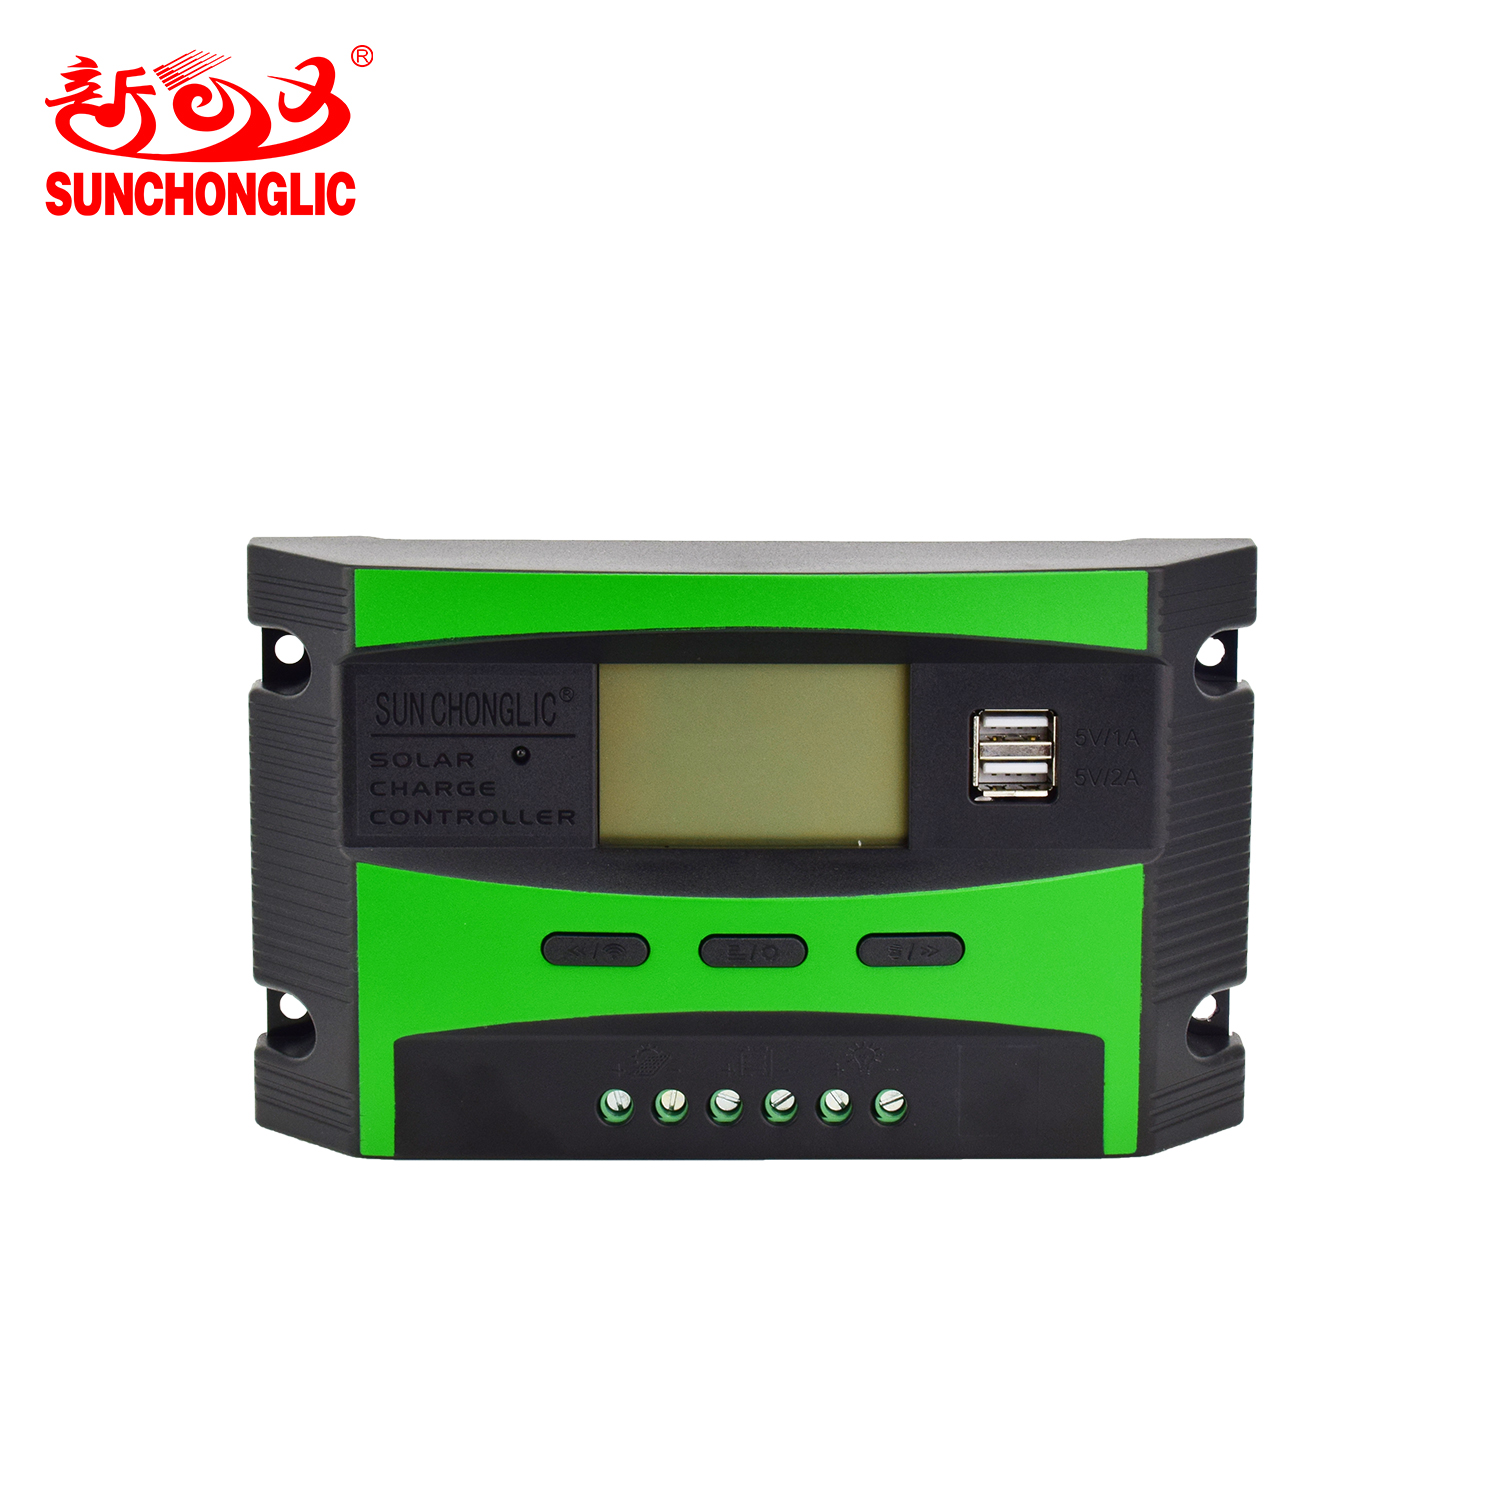 PWM Solar Charge Controller - FT-C1220